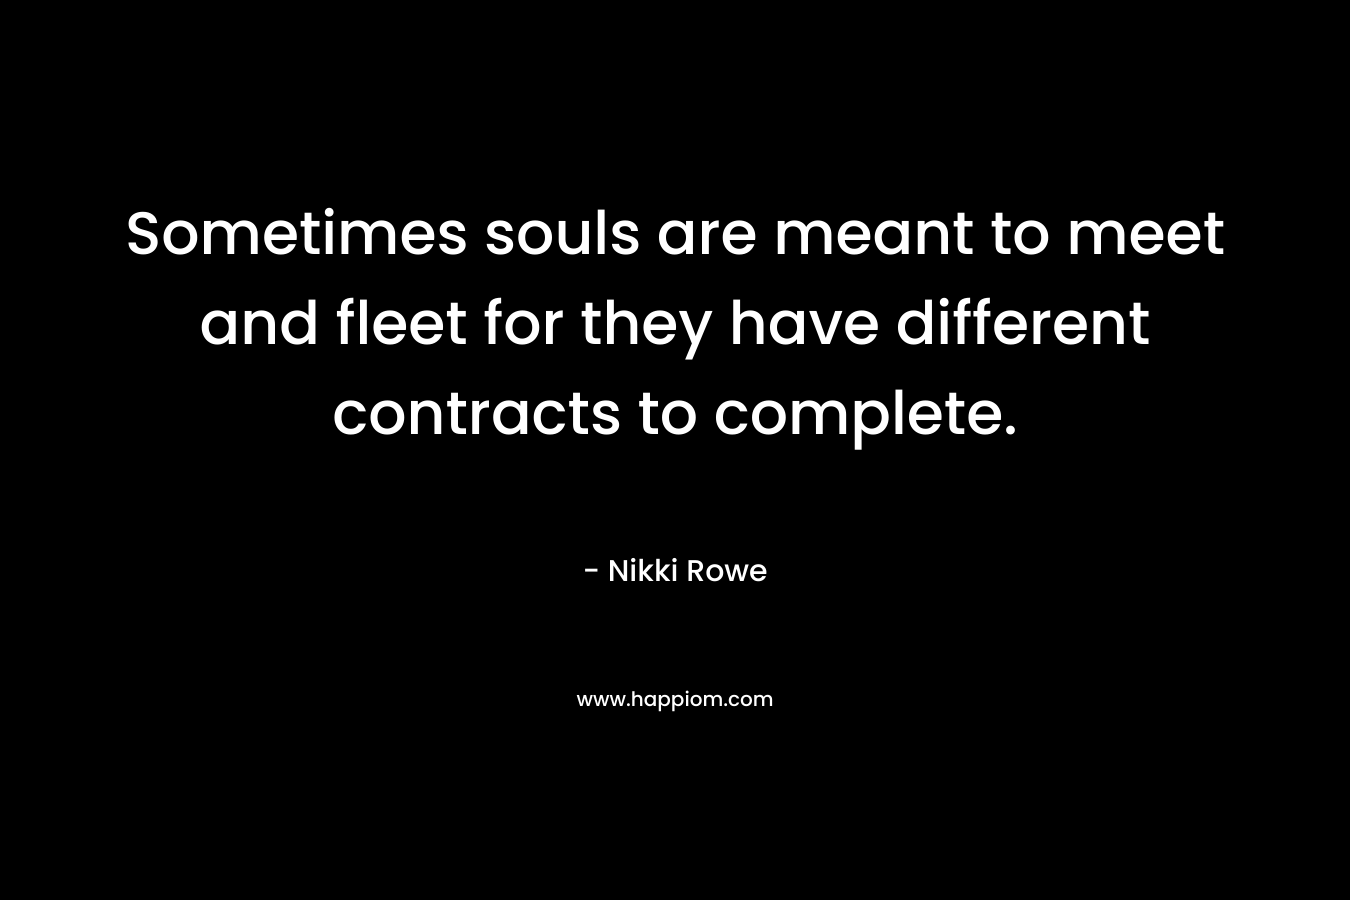 Sometimes souls are meant to meet and fleet for they have different contracts to complete. – Nikki Rowe